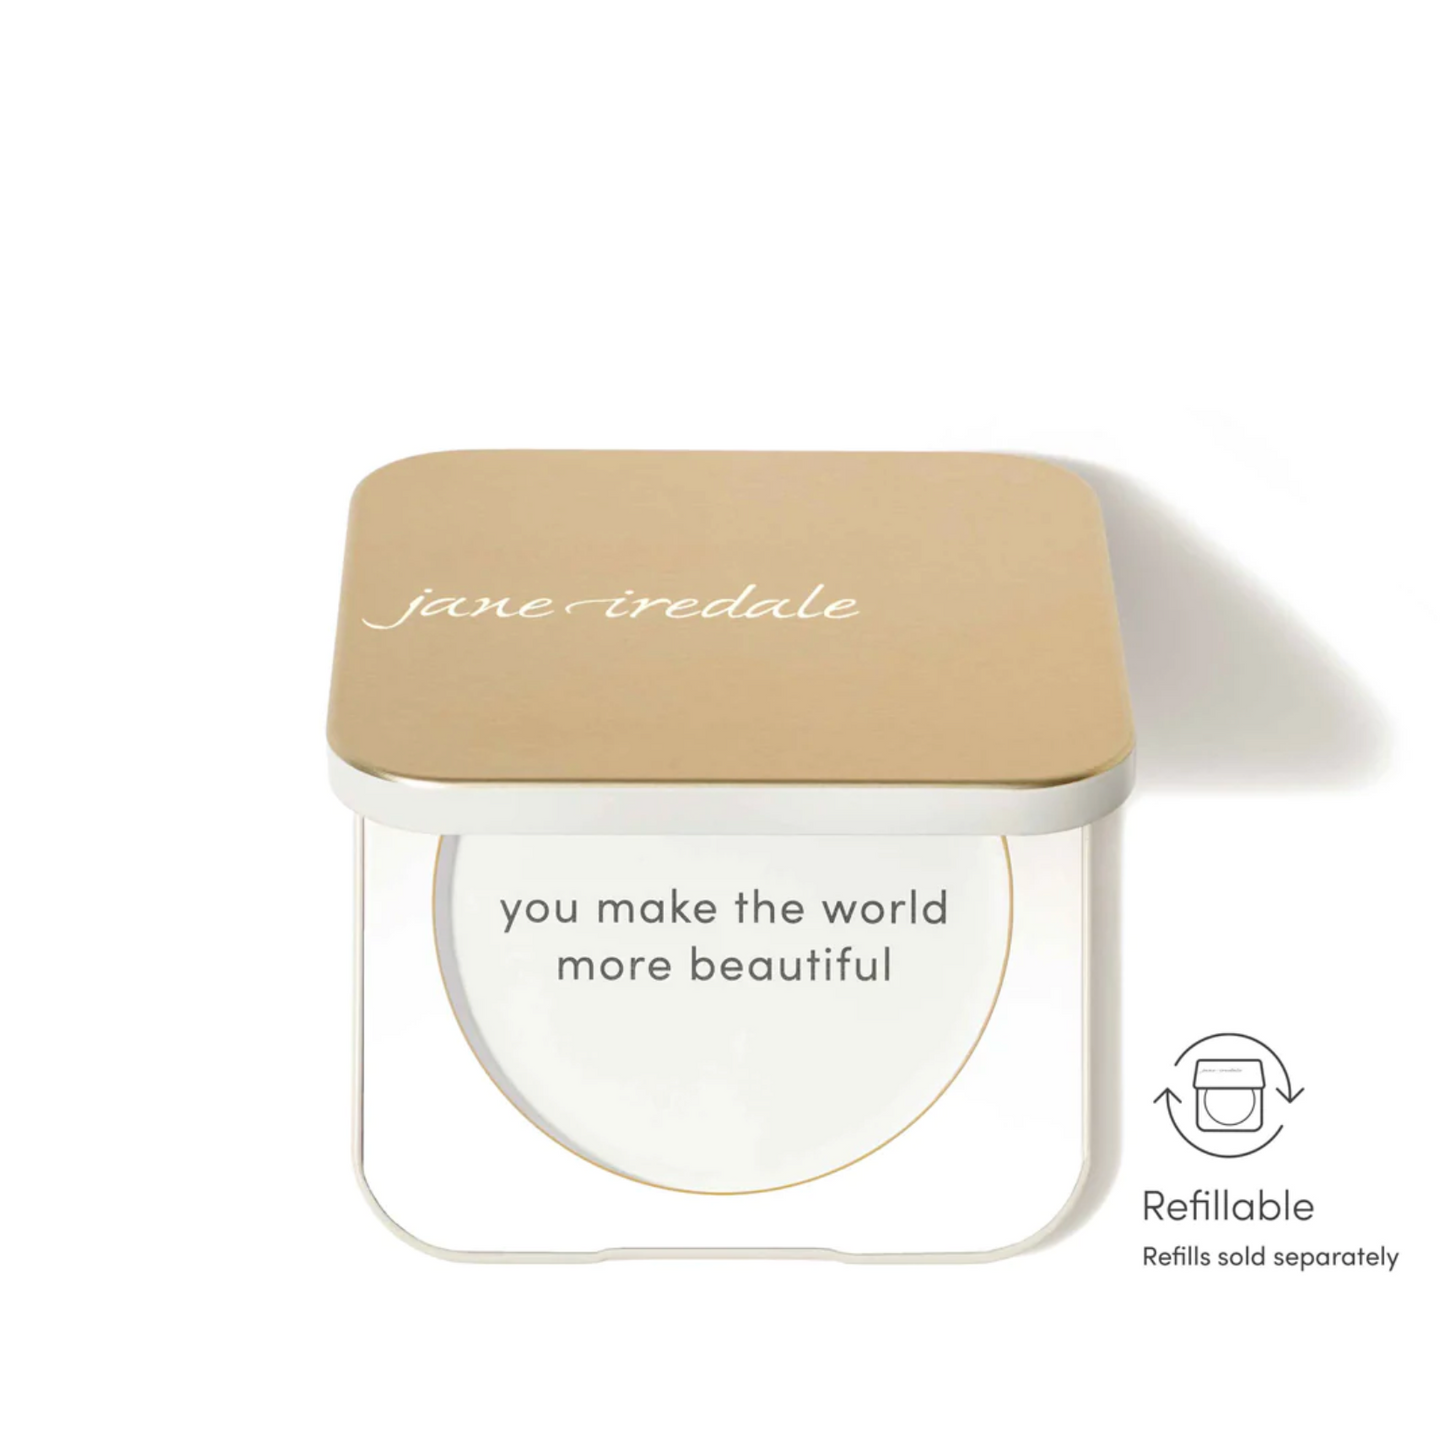 Jane Iredale - Refillable Compact